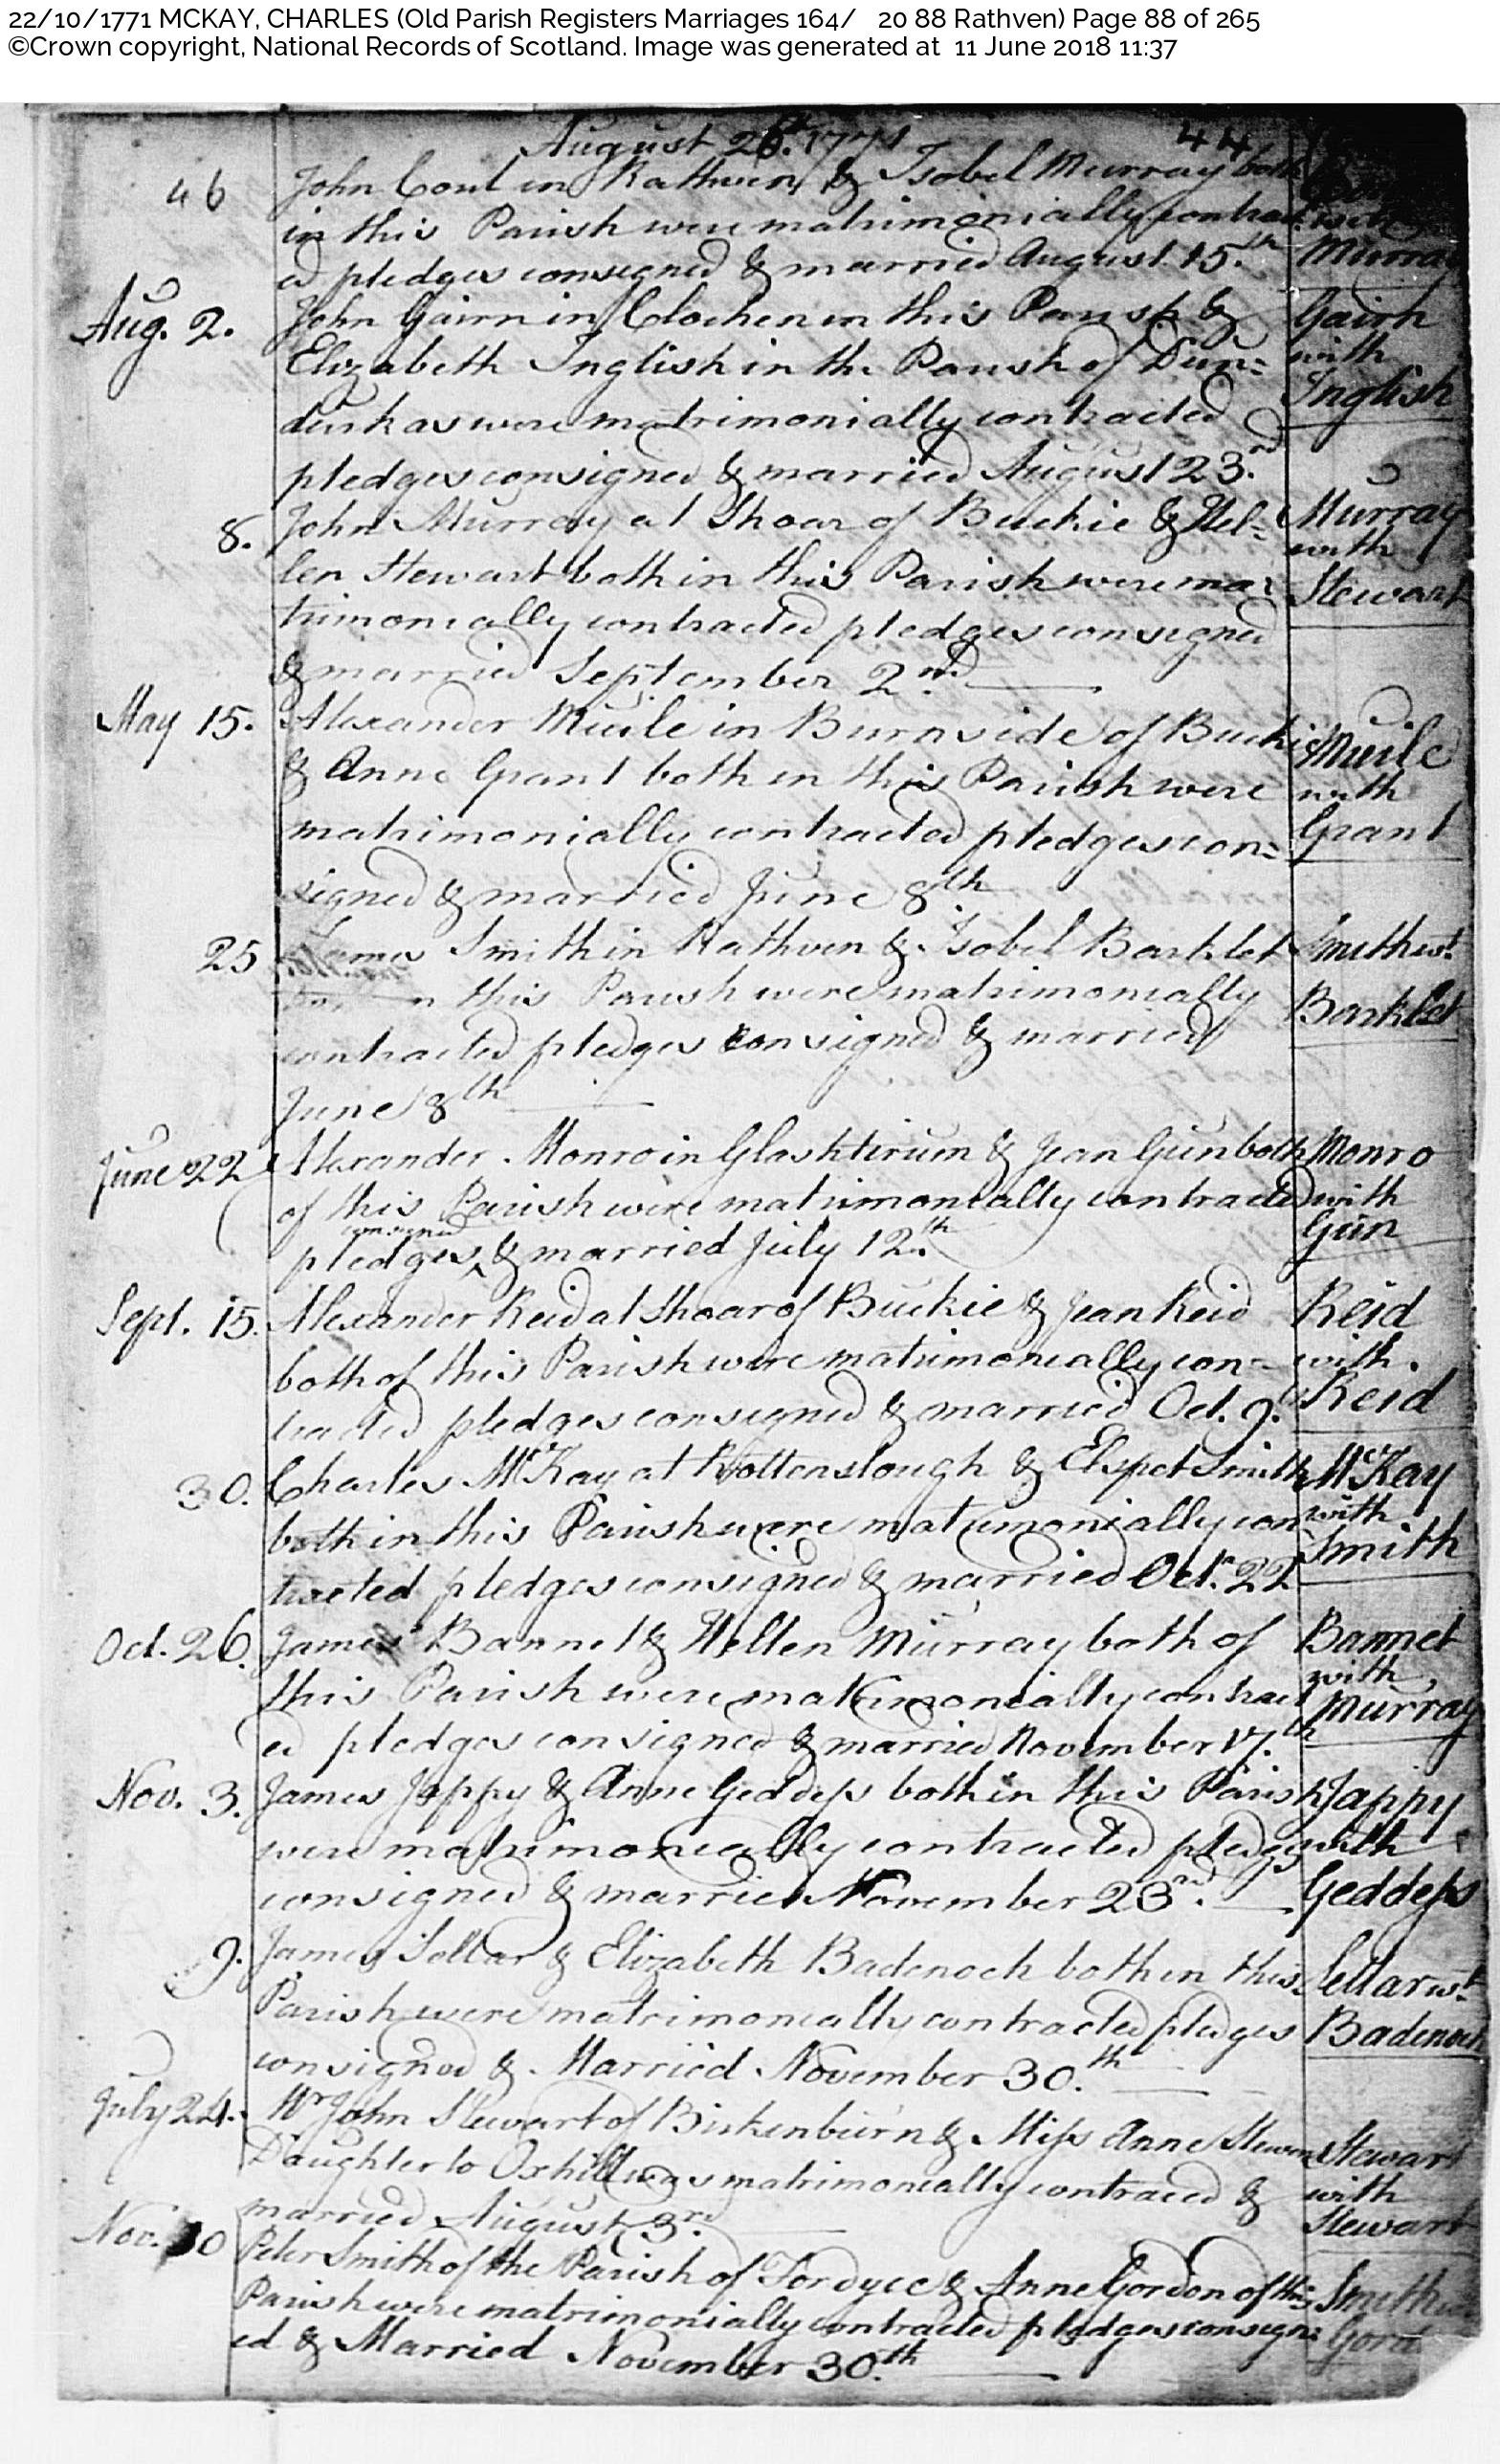 Charles McKay and Elspeth Smith marriage 1771 ScotlandsPeople, October 22, 1771, Linked To: <a href='i197.html' >Charles McKay °</a>